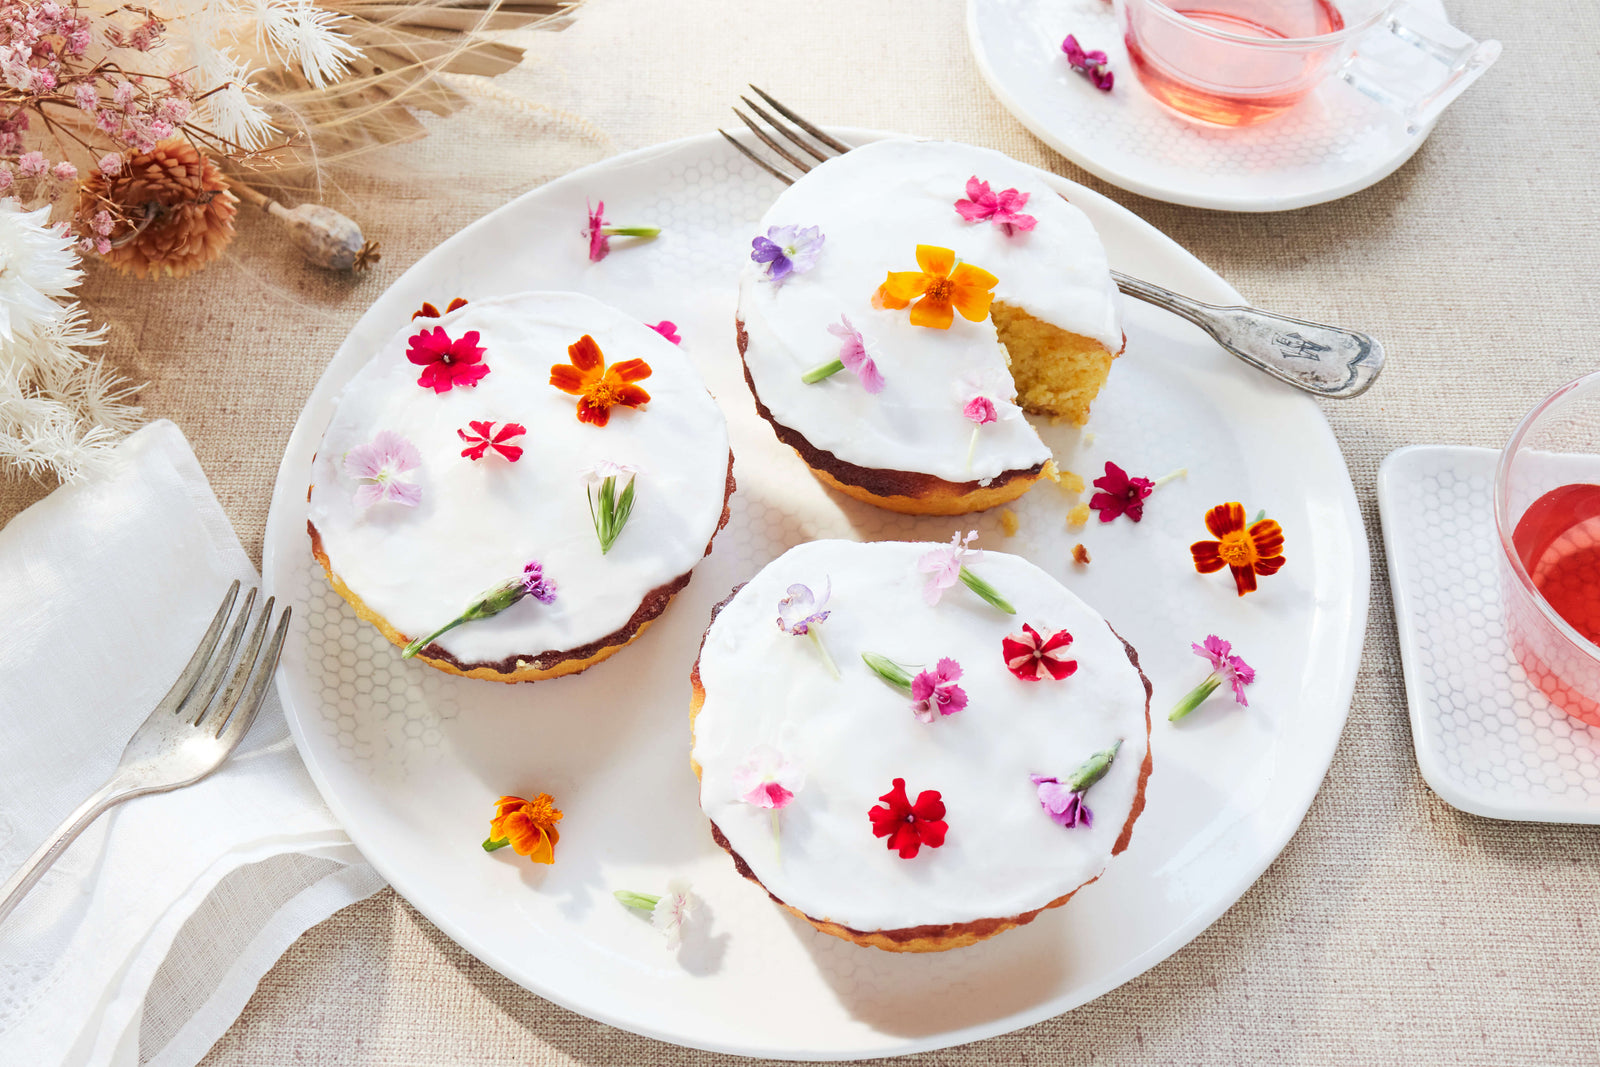 Three Orange & Almond Cupcakes from Bourke Street Bakery with white frosting, covered in bright and colorful tiny flowers on a DBO Home Honeycomb Dinner Plate, with colorful drinks in vintage glasses resting on DBO Honeycomb Serveware